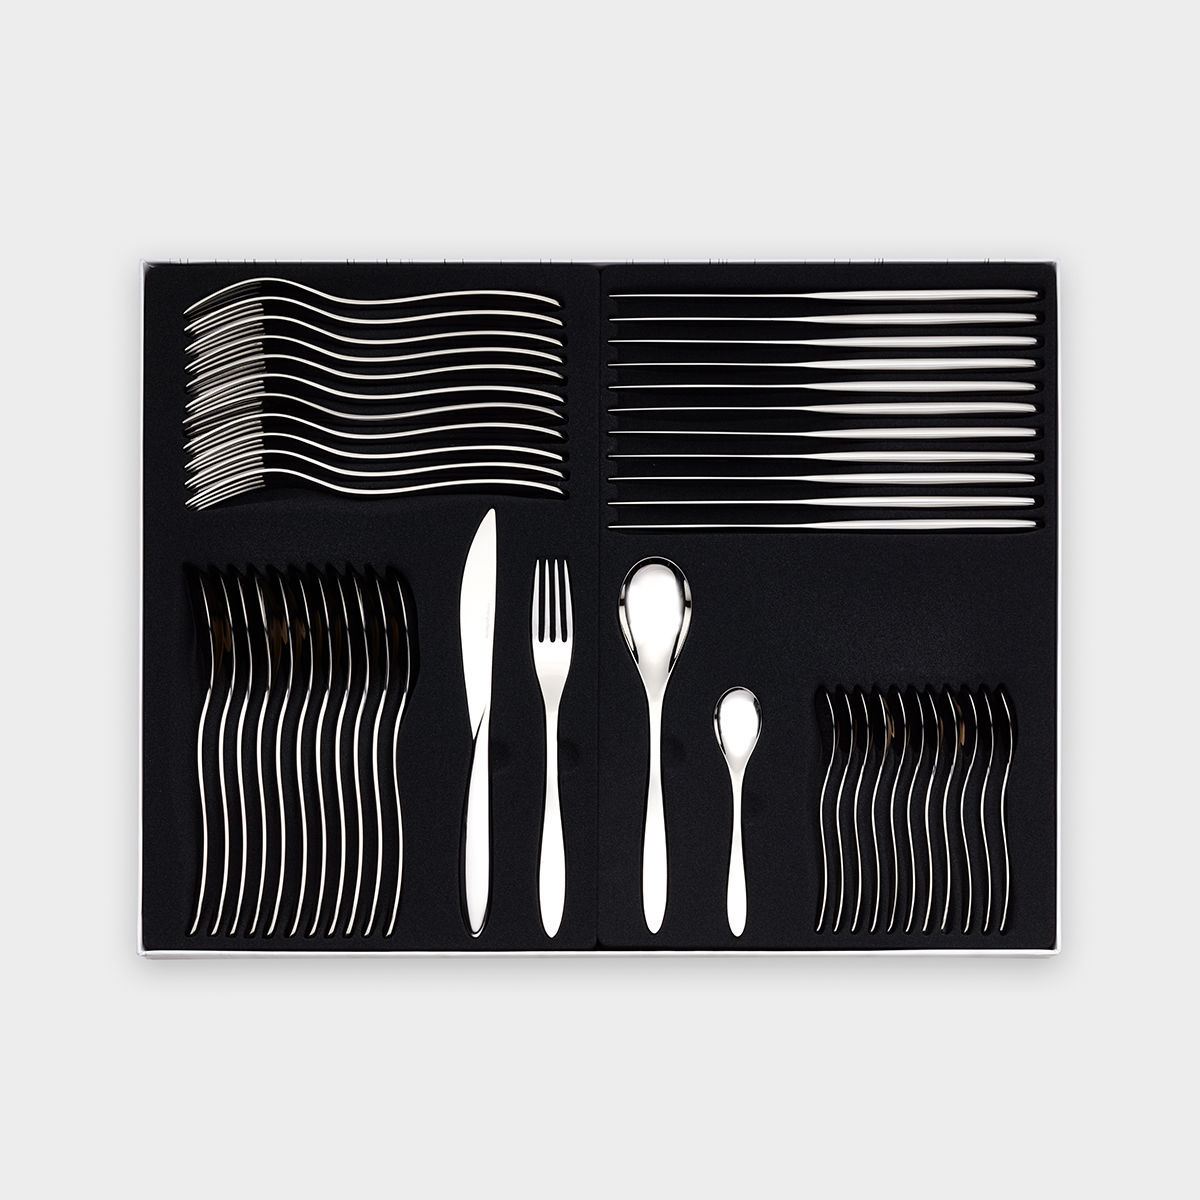 Maria cutlery set 48 pieces product image